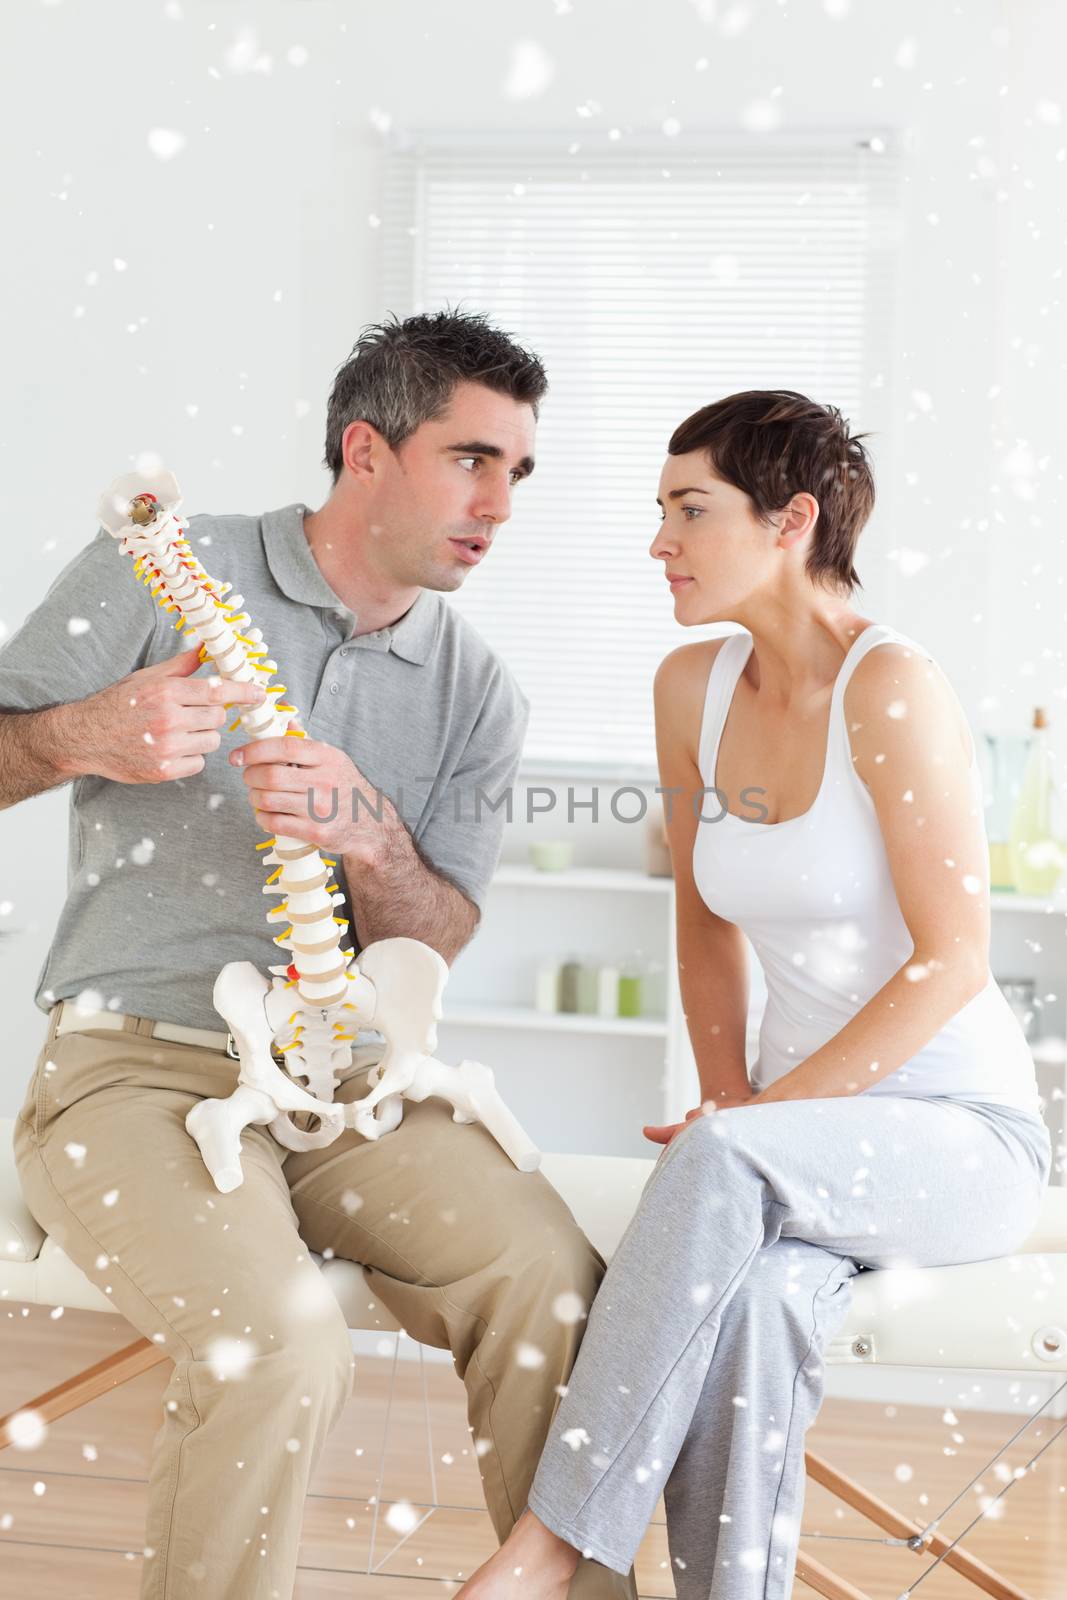 Composite image of Woman listening to her chiropractor in a snow falling